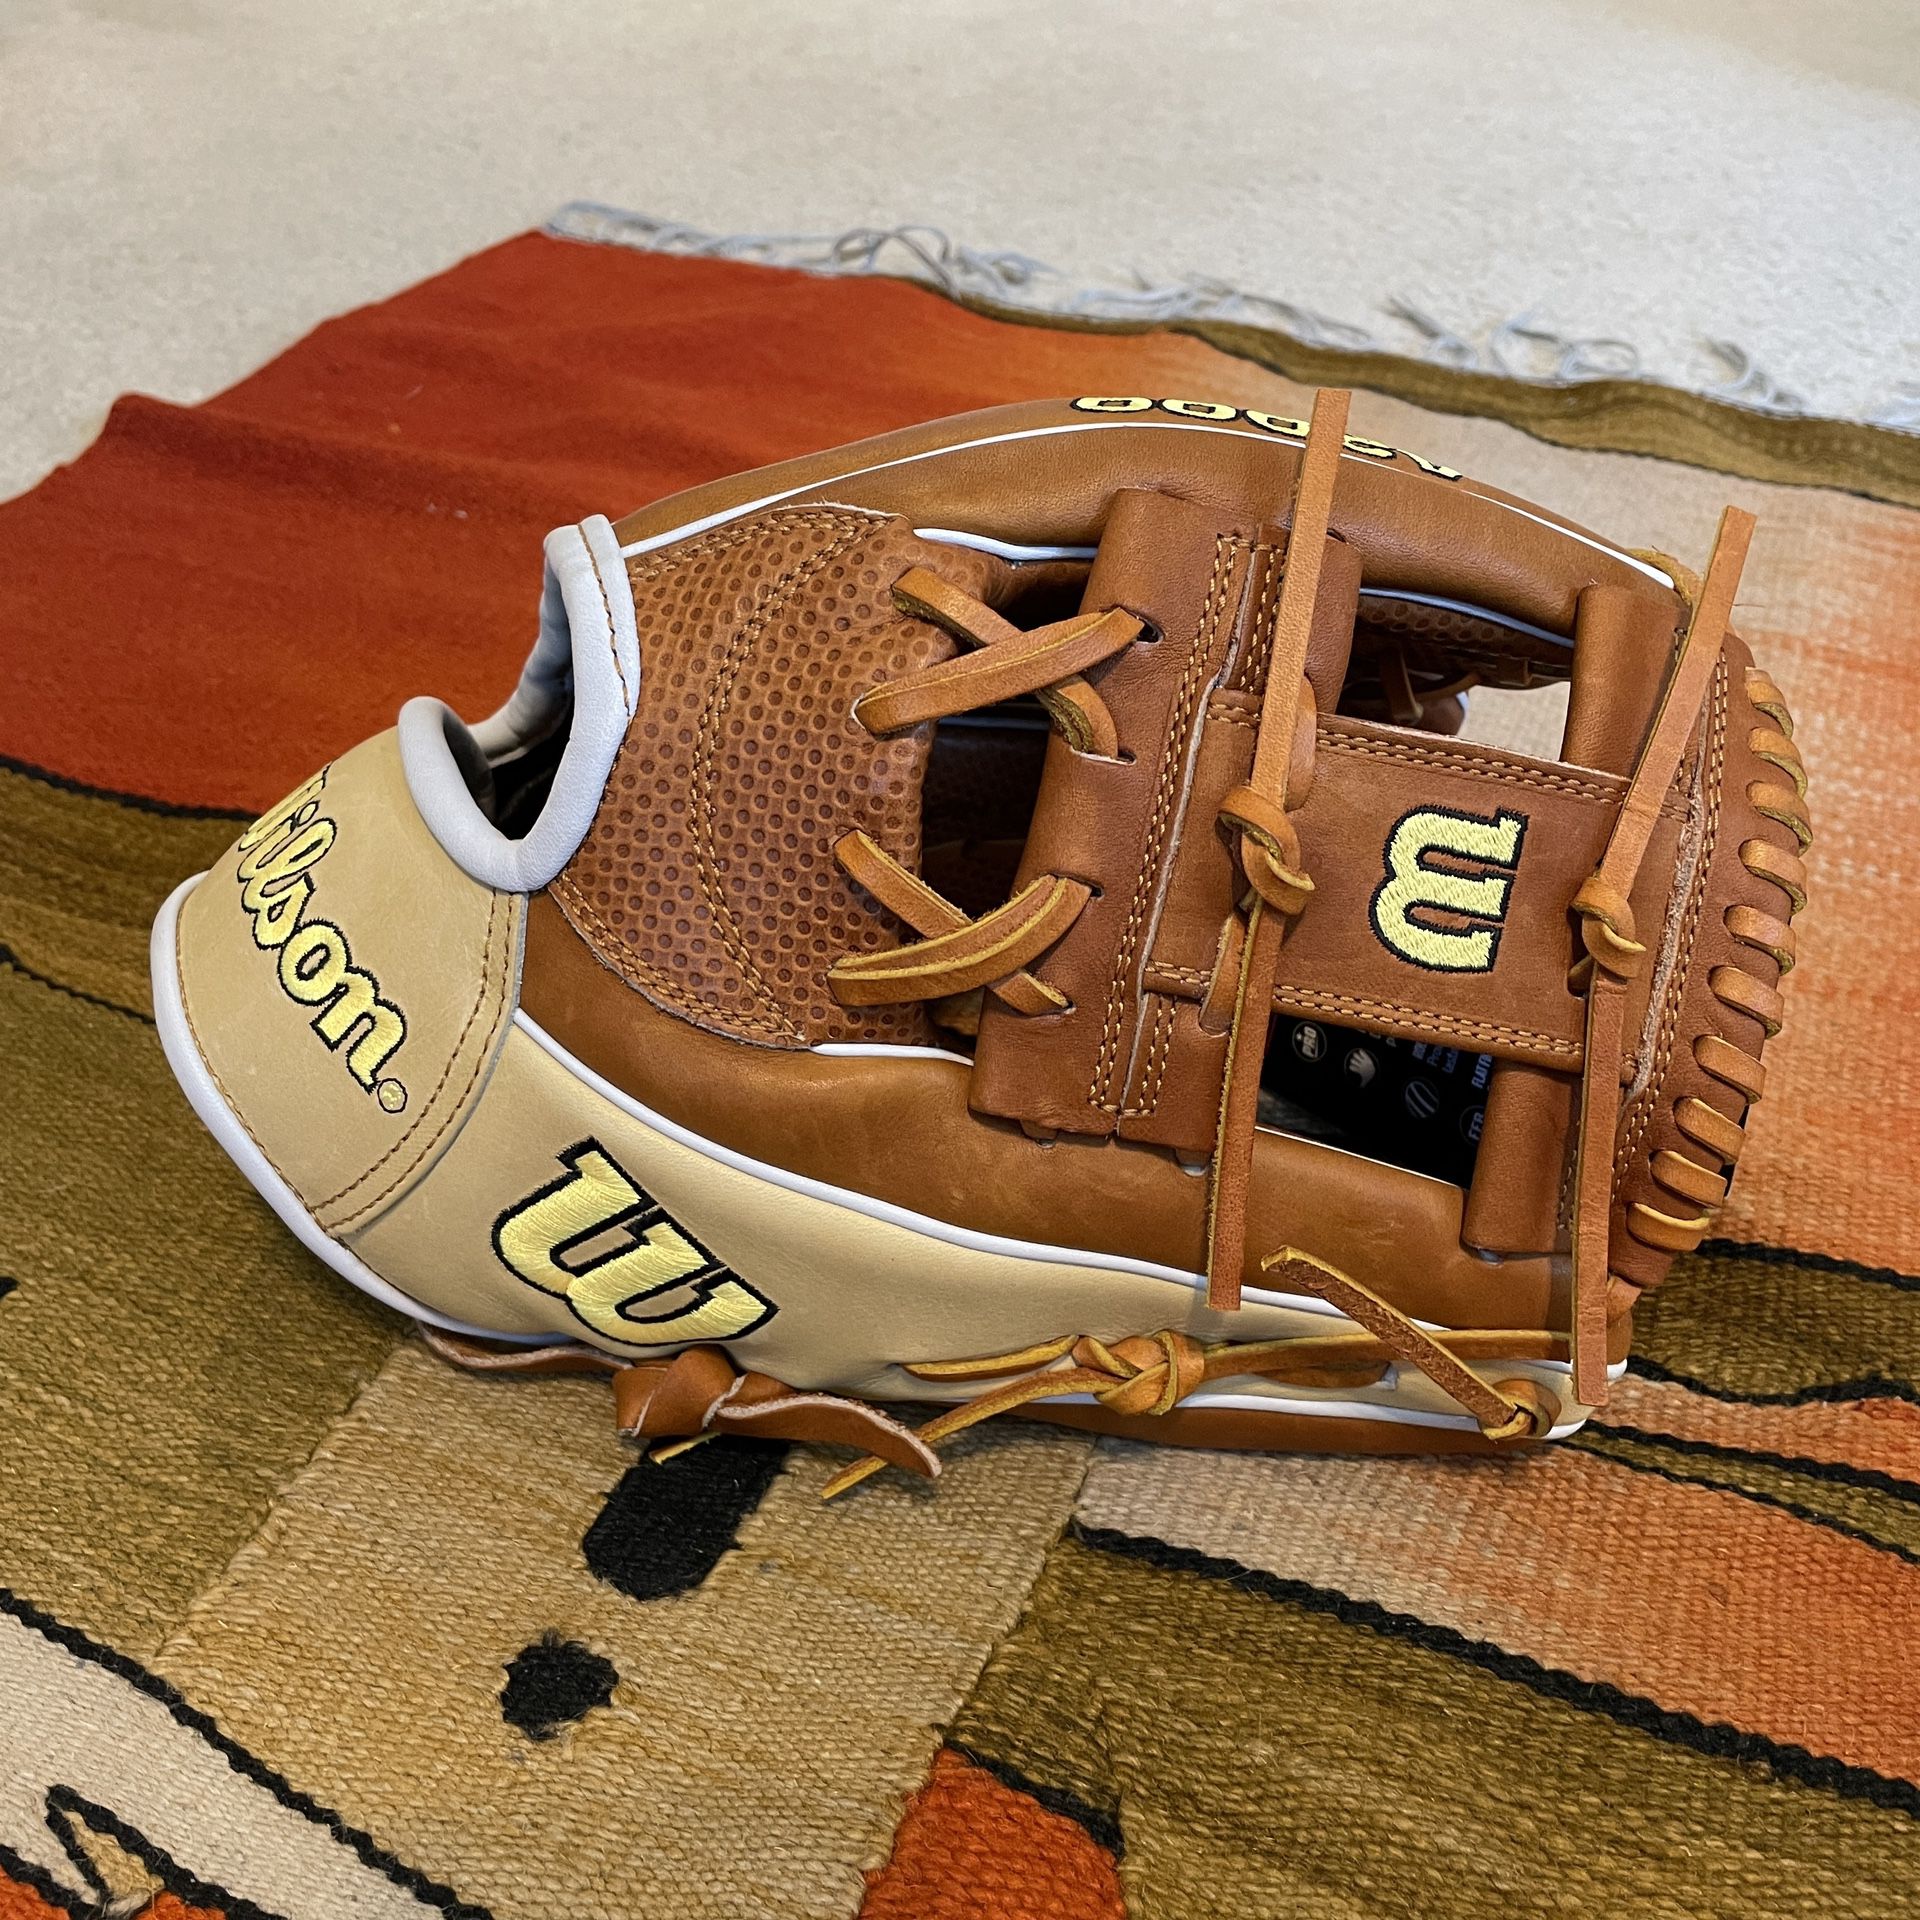 Brand New With Tags 2022 Wilson A2000 1786SC Baseball Glove 